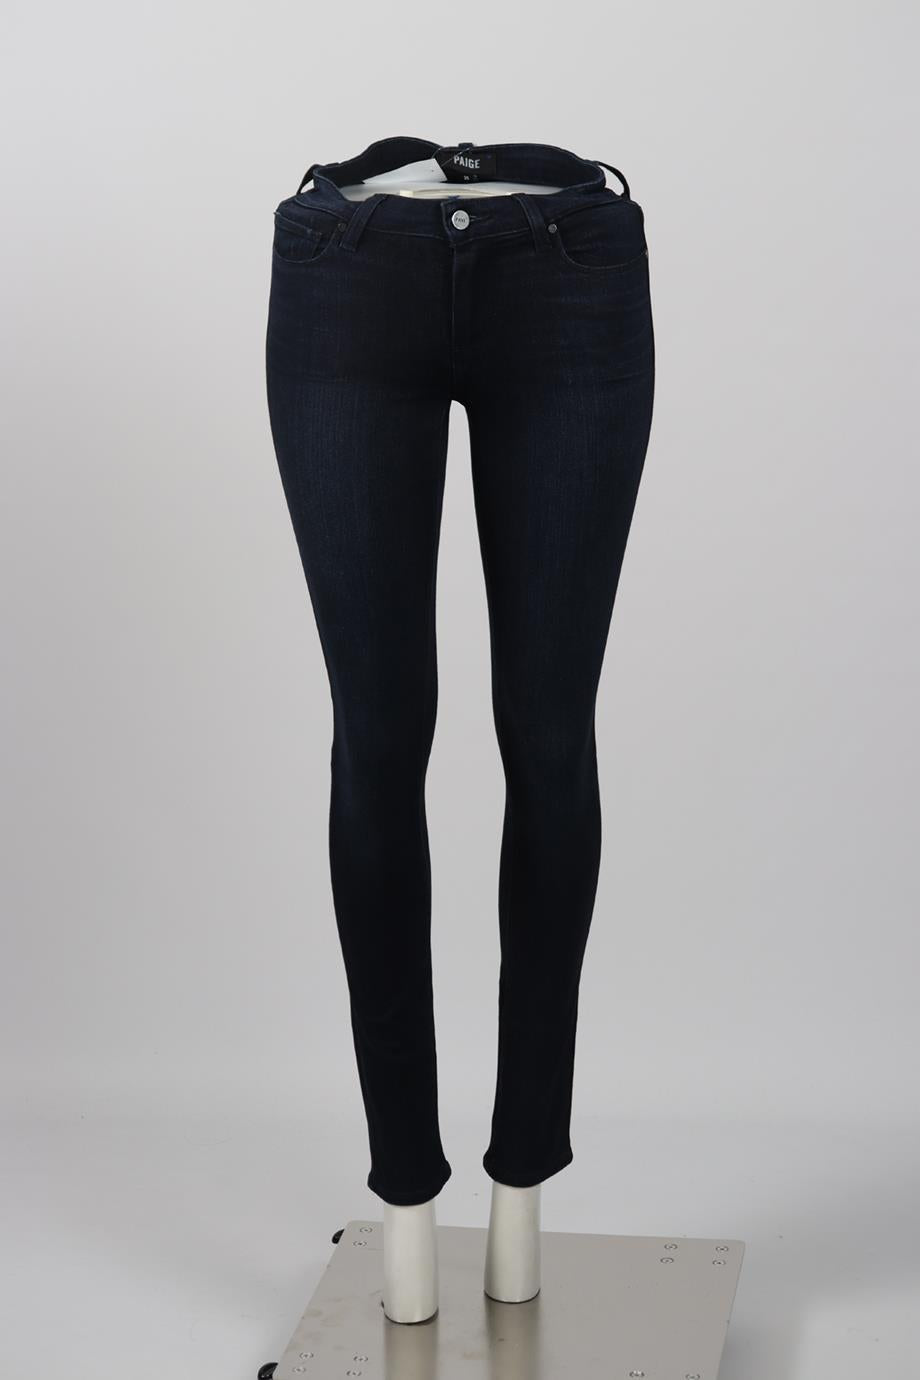 PAIGE HIGH RISE SKINNY JEANS W25 UK 6-8